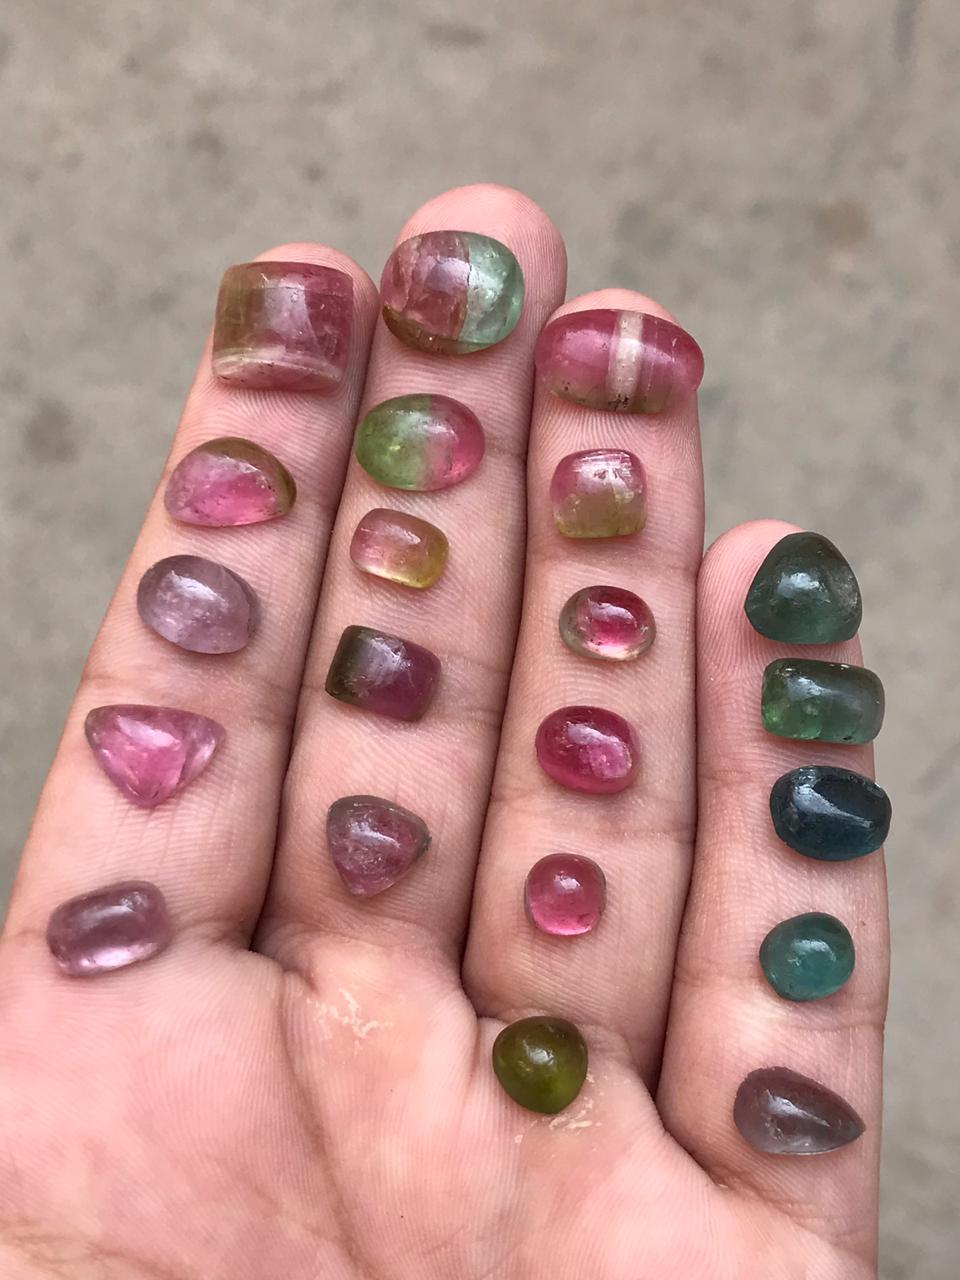 Tourmaline Cabochons available for sale